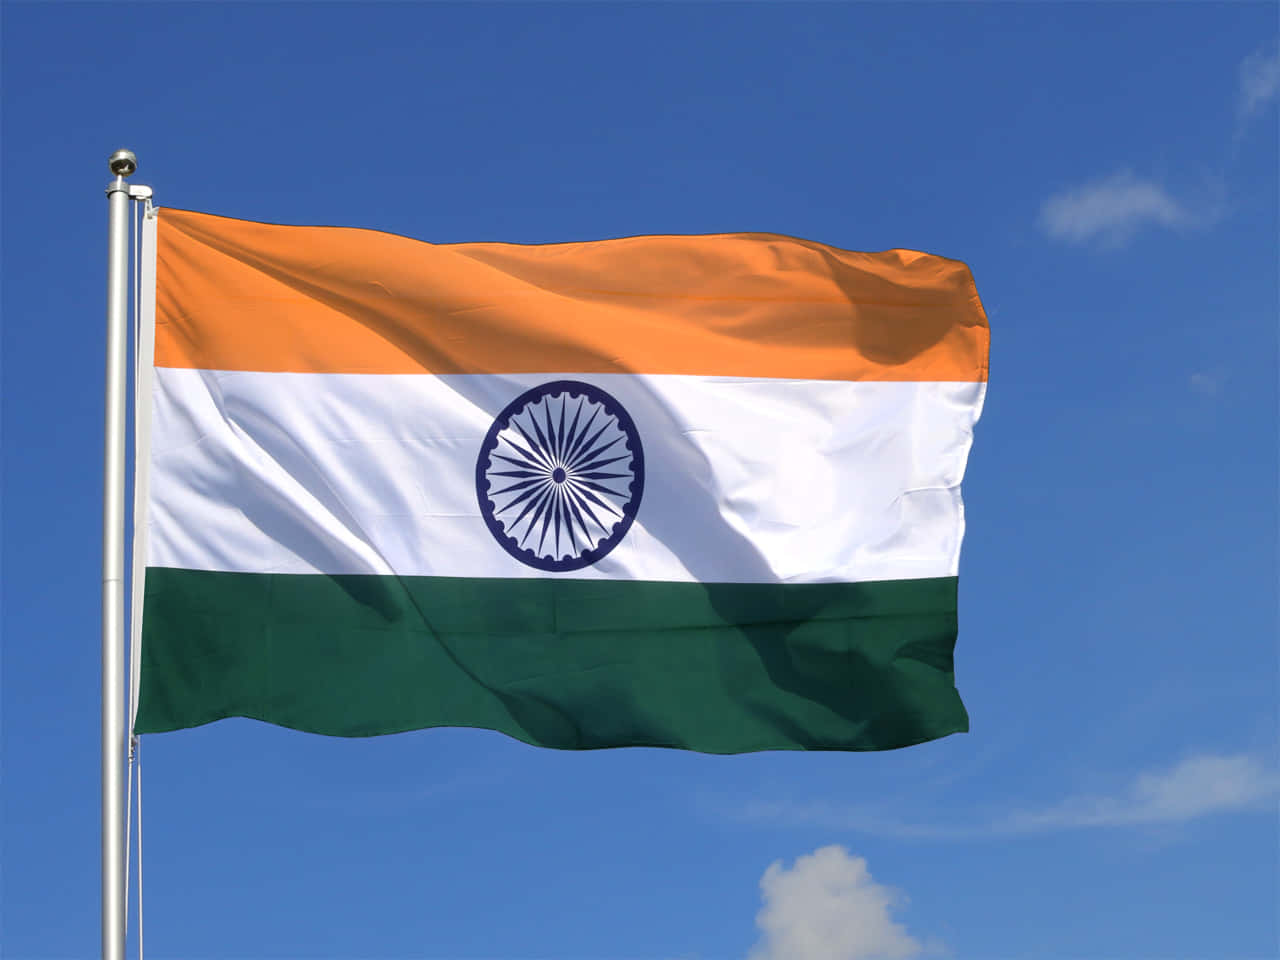 The National Flag of India - Representing Unity in Diversity